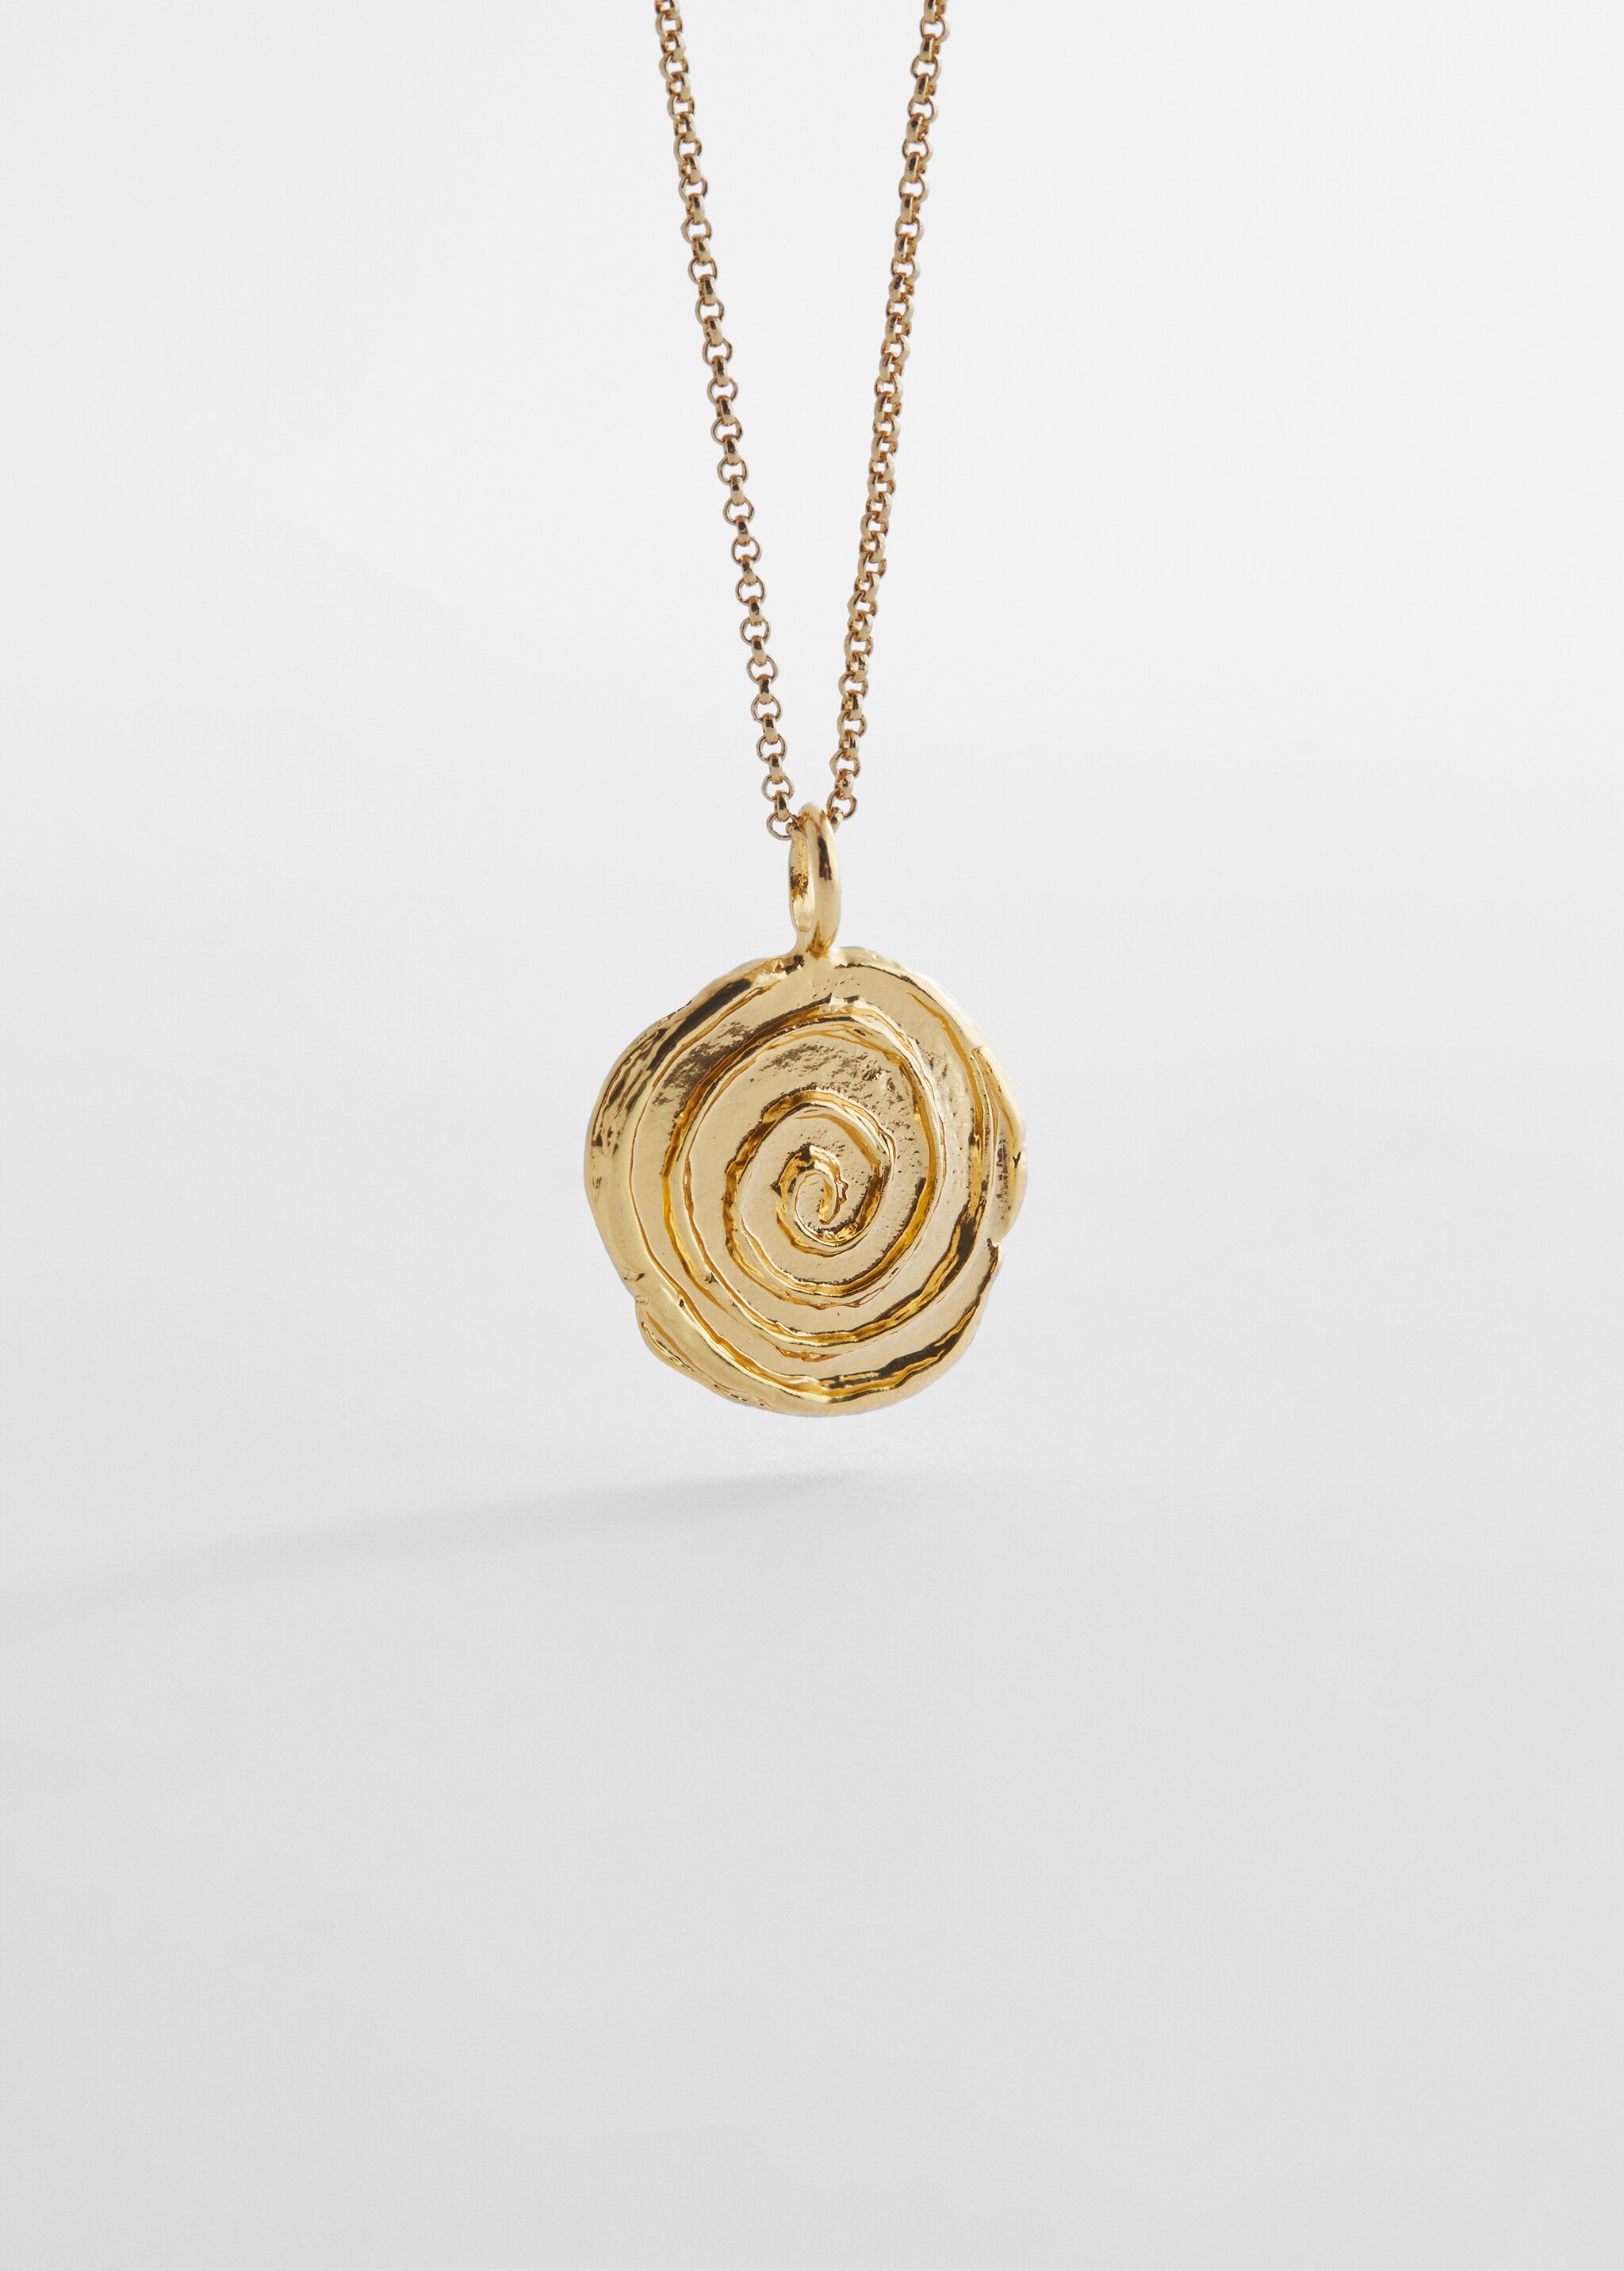 Spiral necklace - Details of the article 1